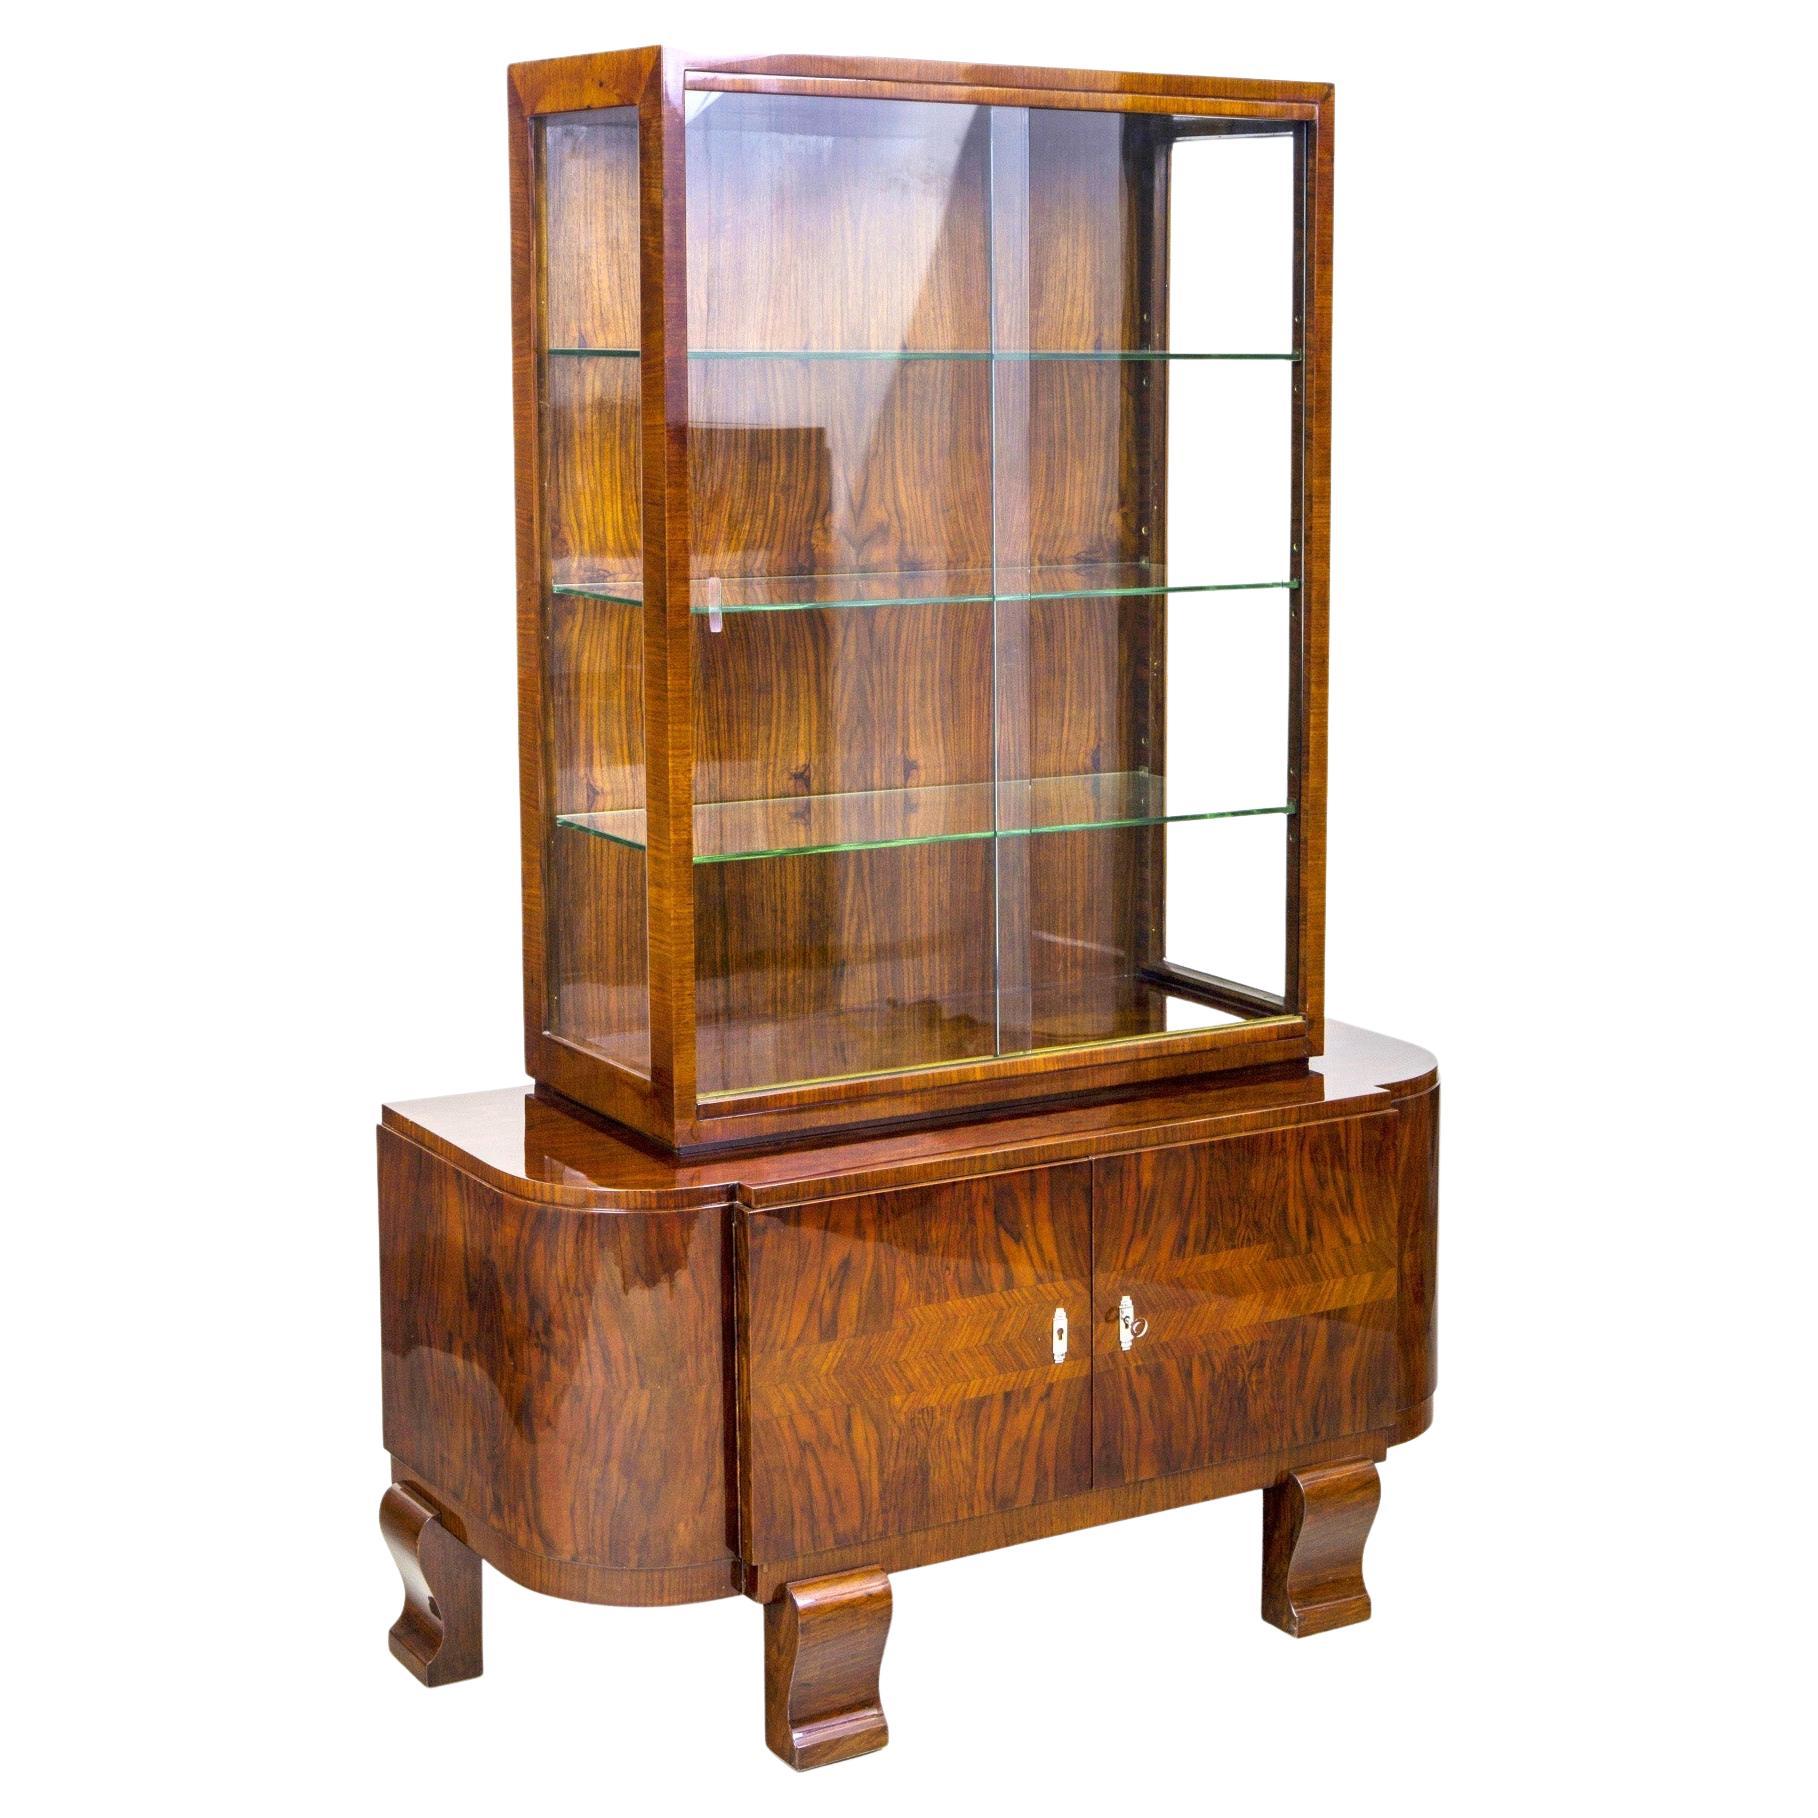 Walnut Display Cabinet Made in France, 1920s, Art Deco Style, Restored For Sale